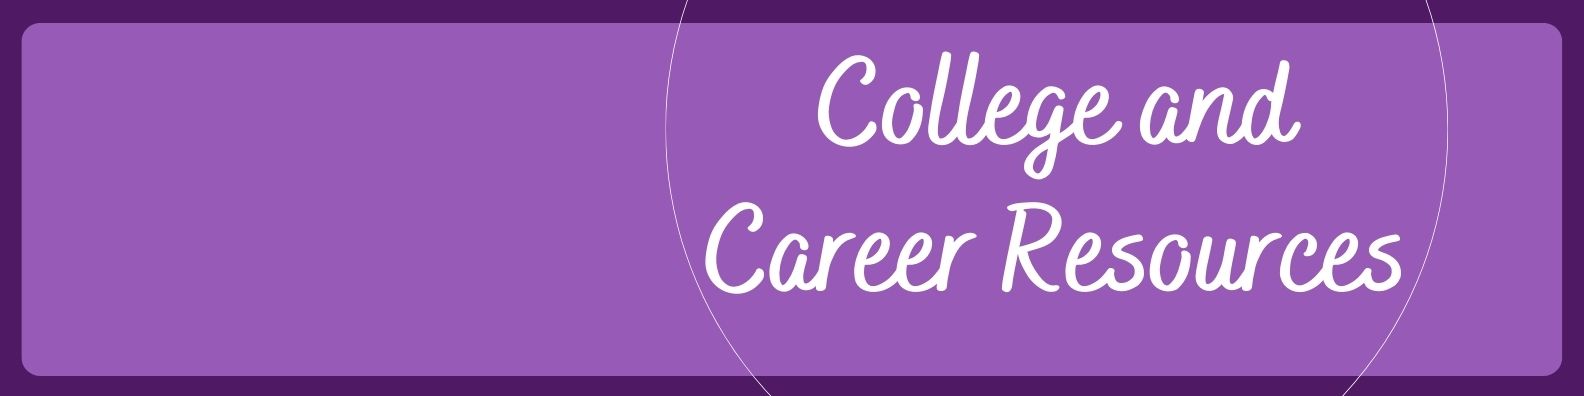 College and Career Resources